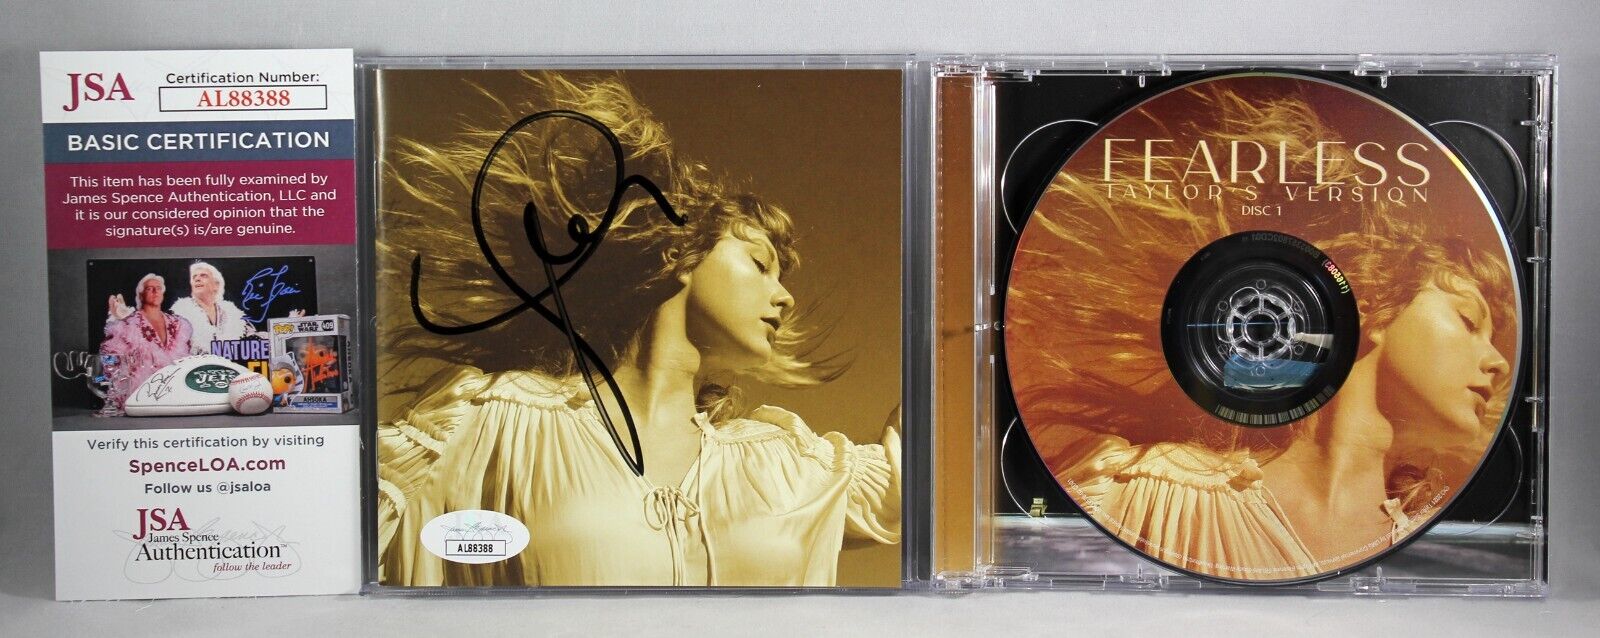 TAYLOR SWIFT SIGNED FEARLESS CD ALBUM AUTOGRAPHED LOVER TAYLOR\'S VERSION JSA COA